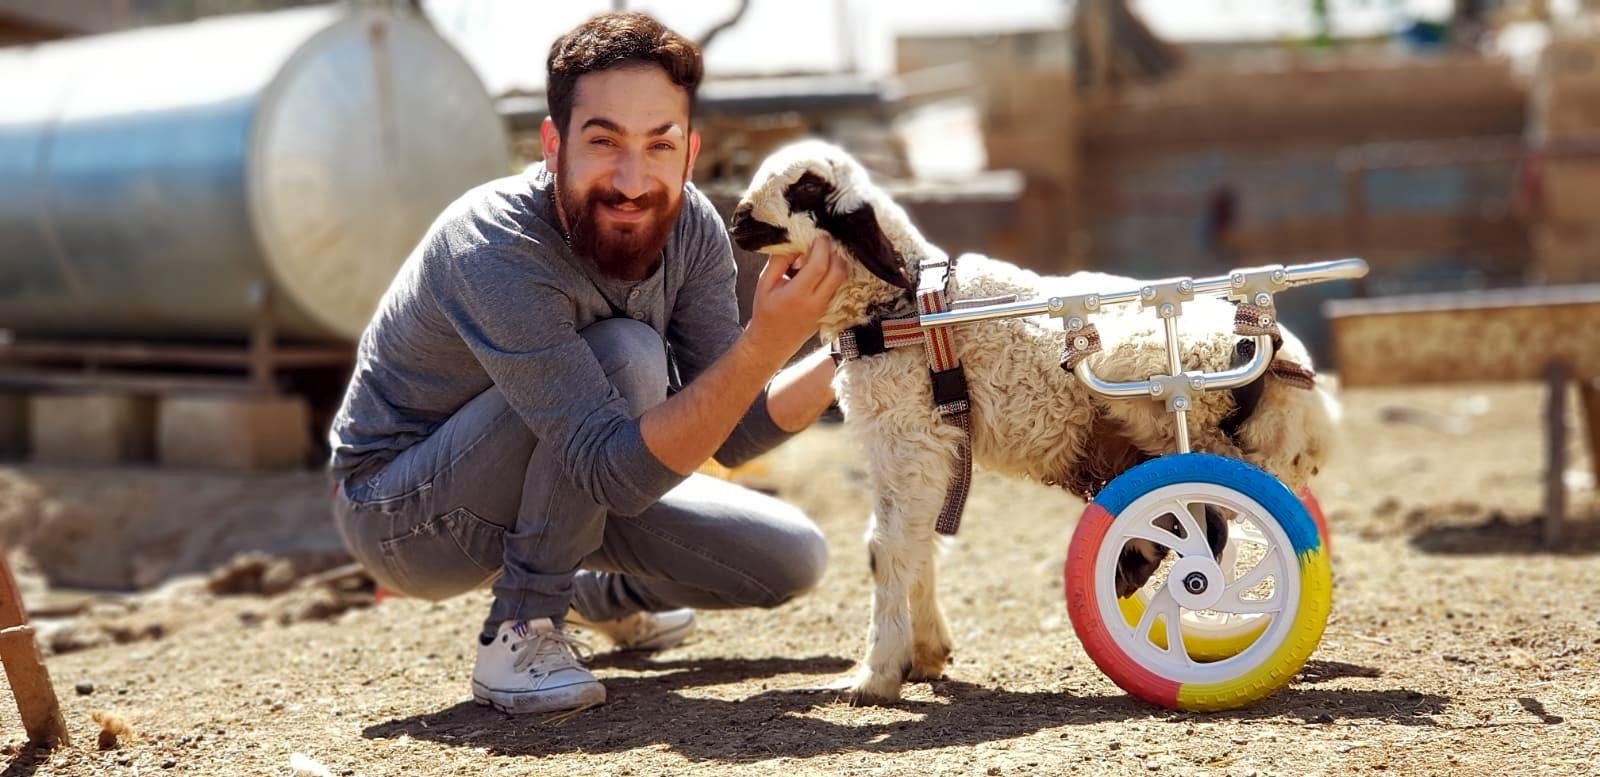 Hasan Kızıl poses next to a disabled lamb in a wheelchair built from toys, in Mardin, southeastern Turkey, May 23, 2018. (DHA PHOTO)